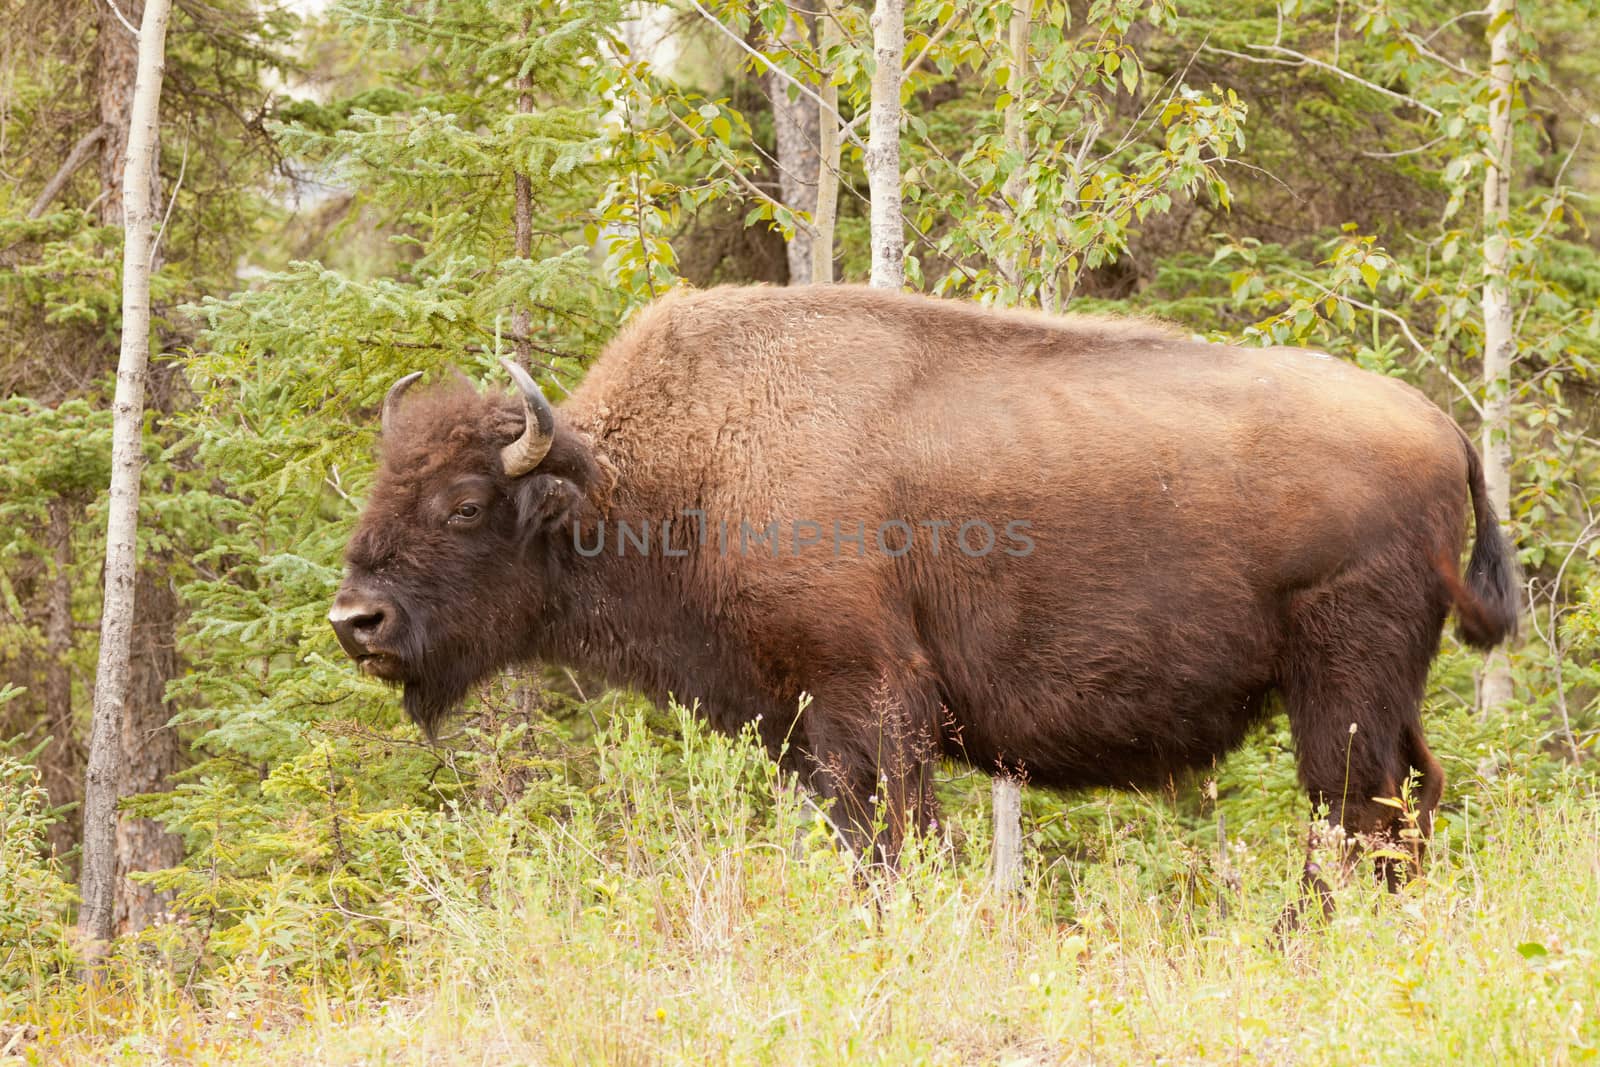 Profile close up view of a large male wood buffalo or wood bison, Bison bison athabascae, on pasture alongside woodland